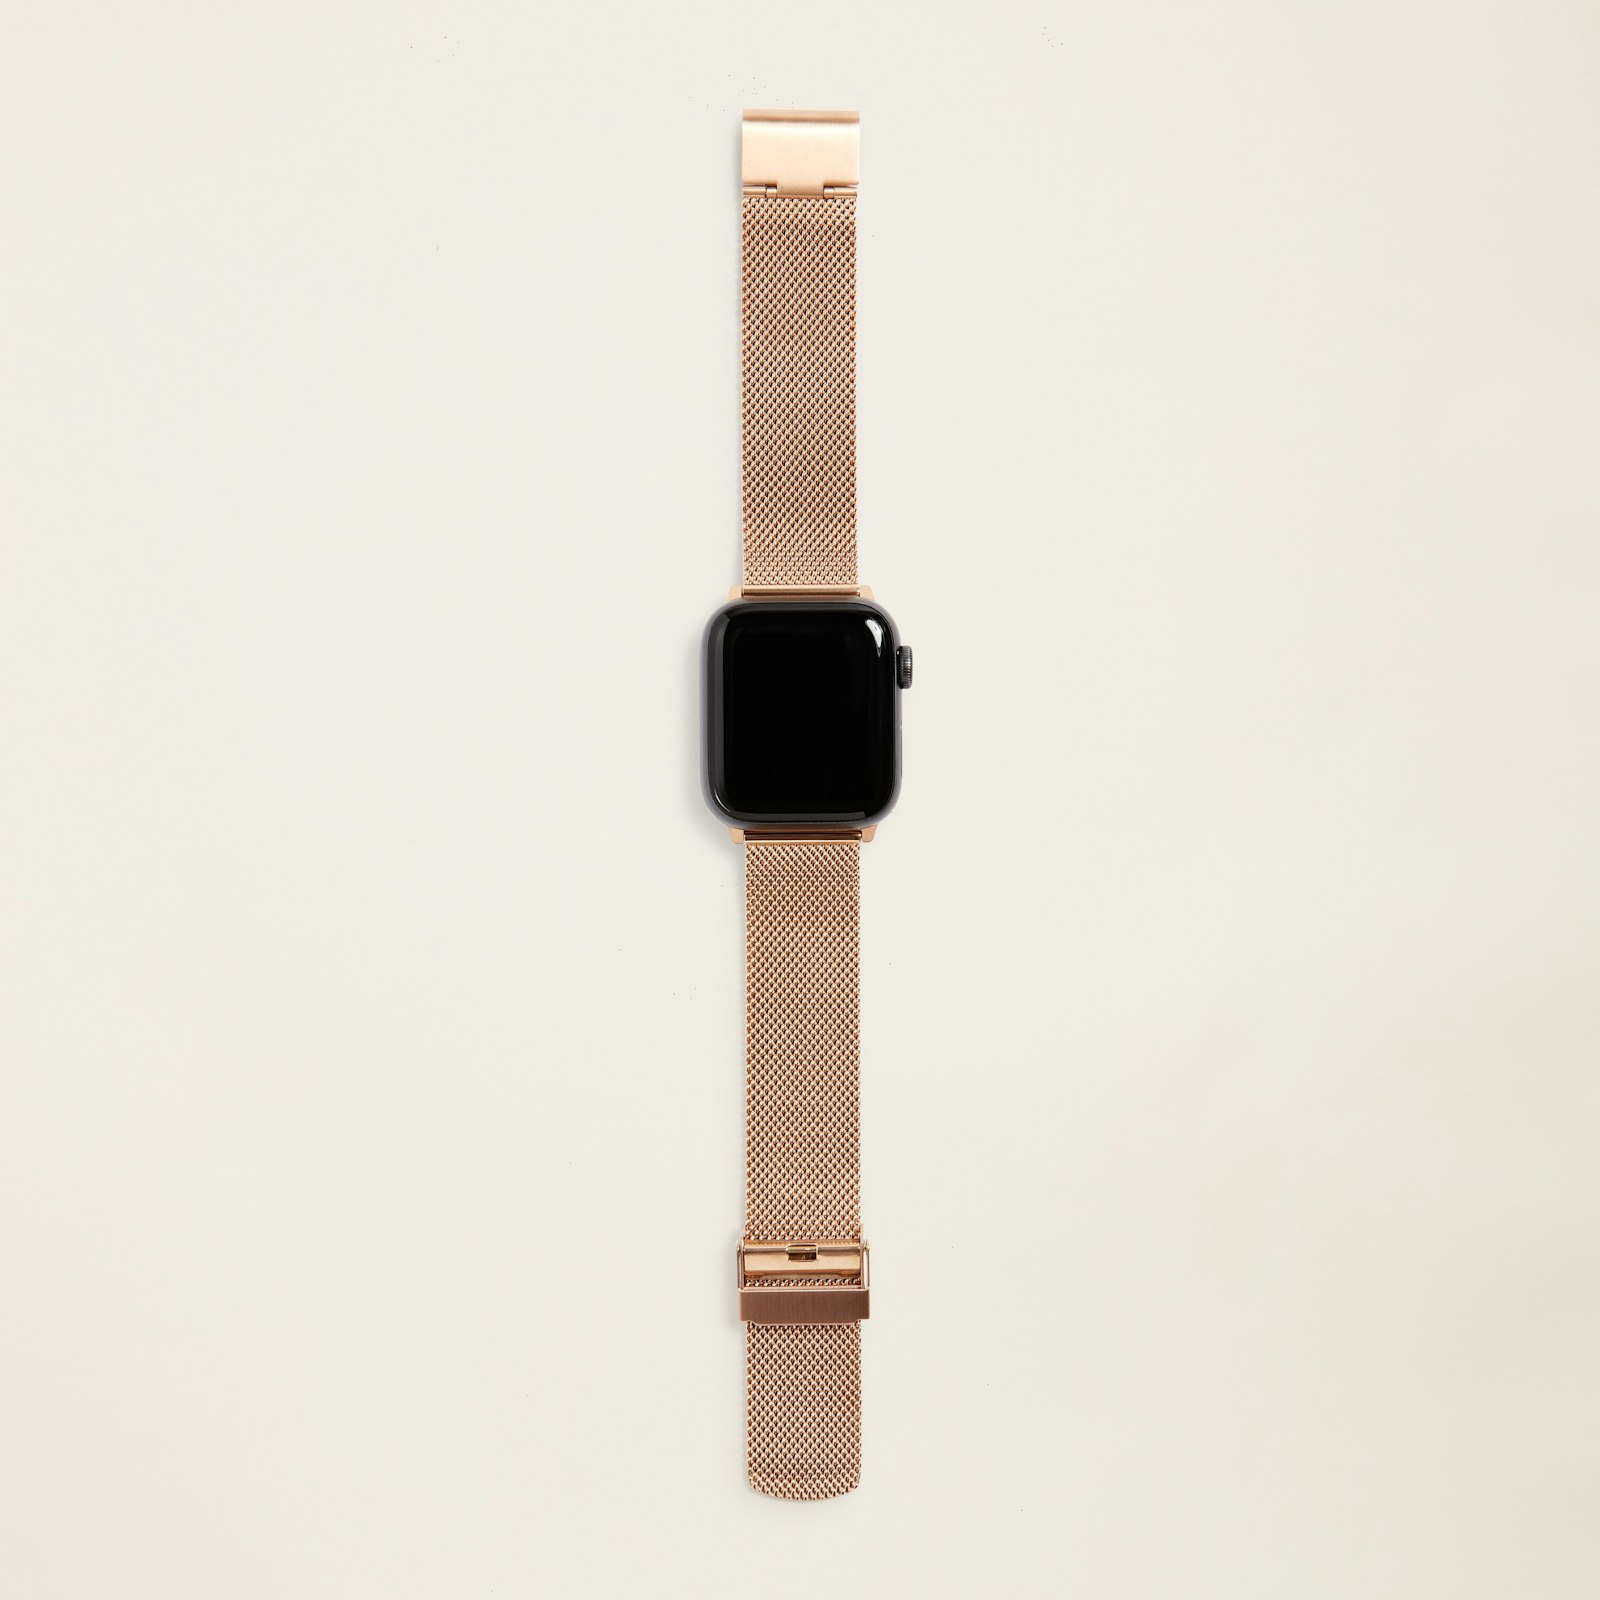 Apple_WatchBand_StainlessSteel_Mesh_RoseGold_Small_1x1_FRONTWITHWATCH_0253.jpg